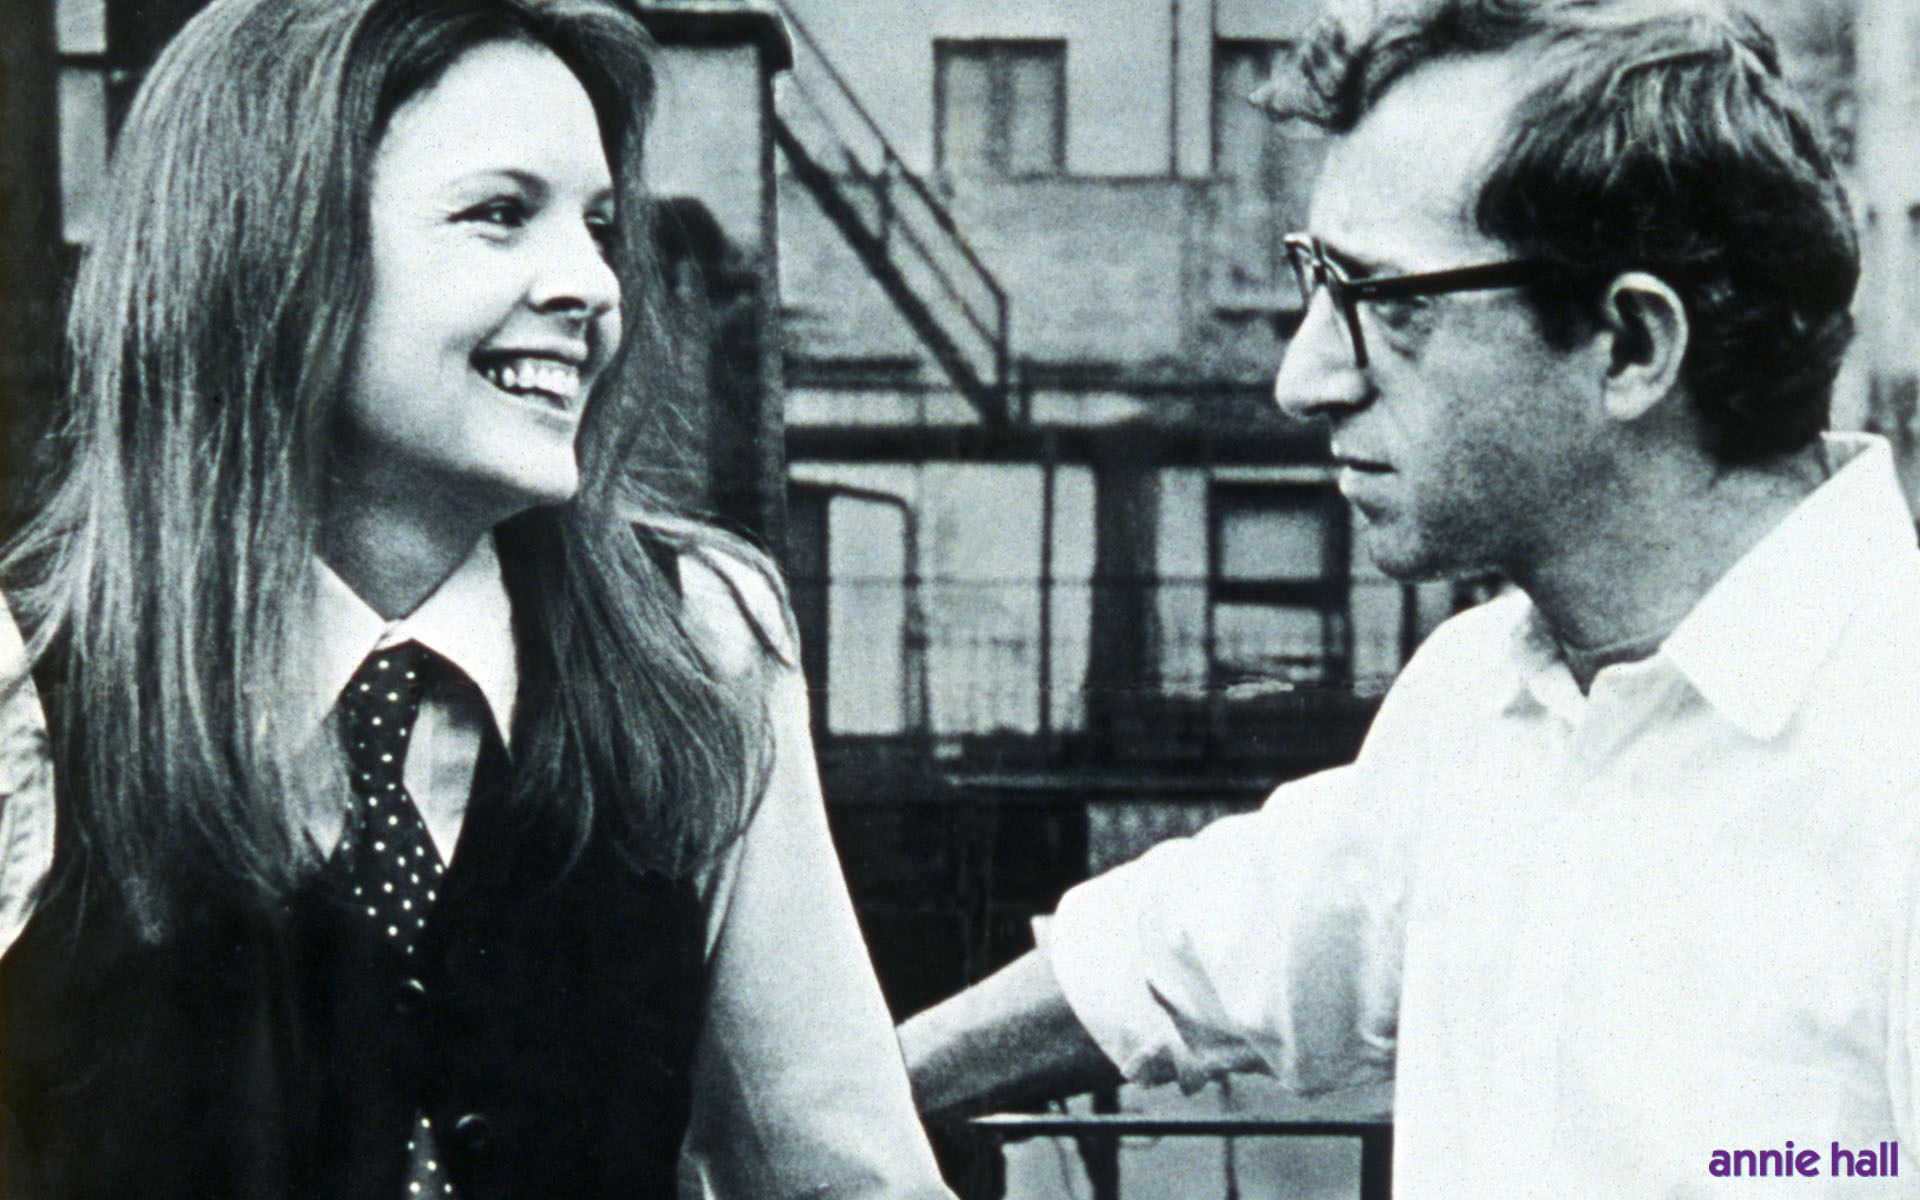 Woody Allen Image Annie Hall HD Wallpaper And Background